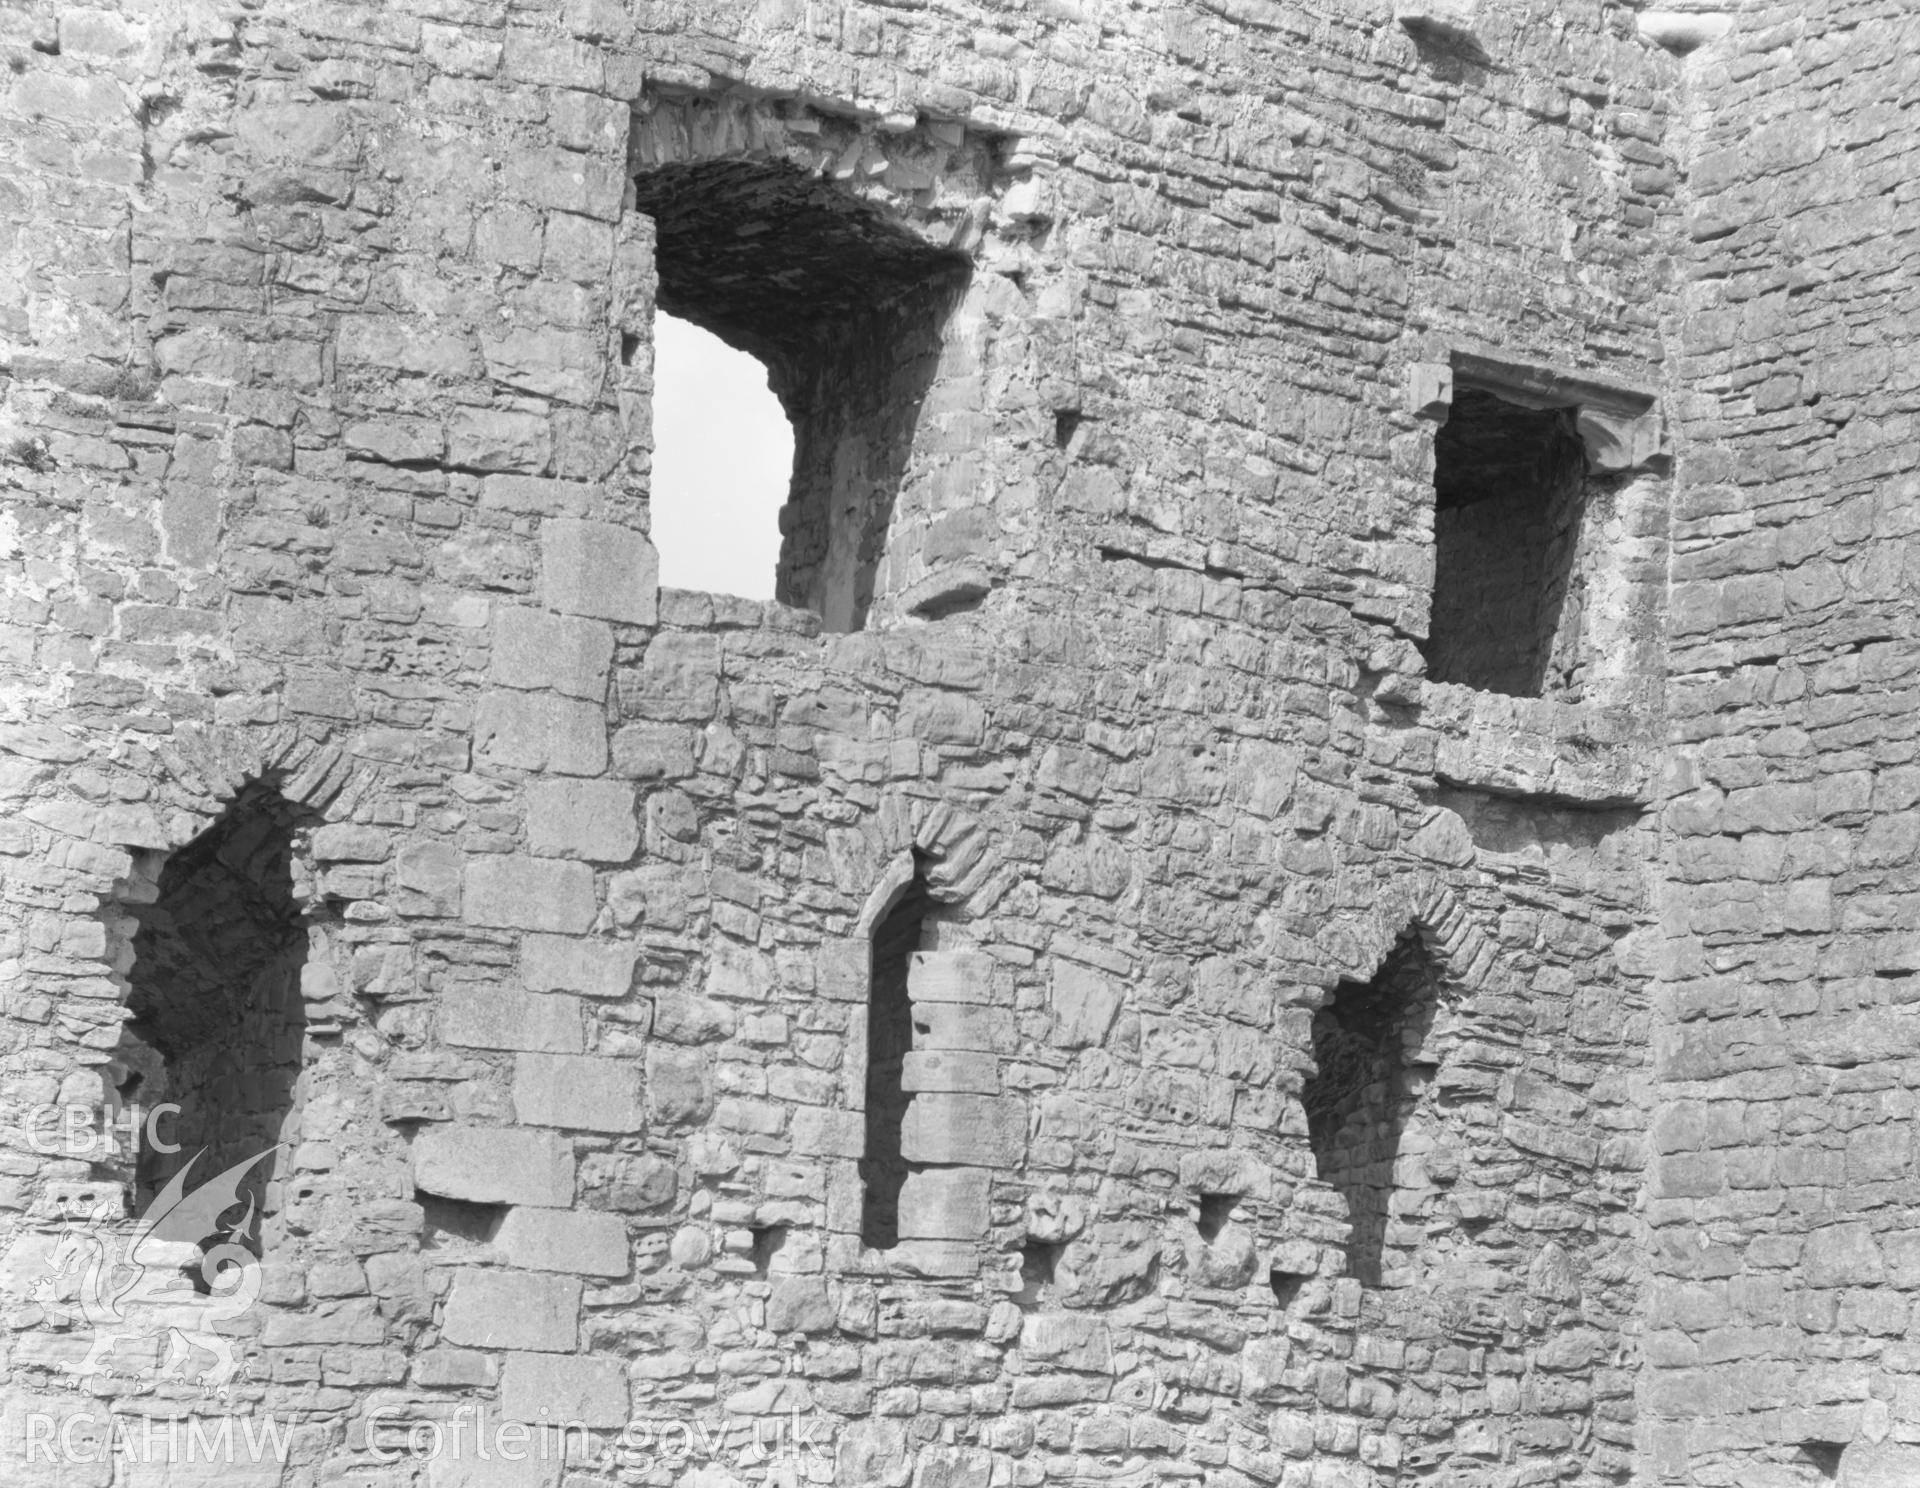 View of windows at Coity Castle, Coity Higher taken 09.04.65.